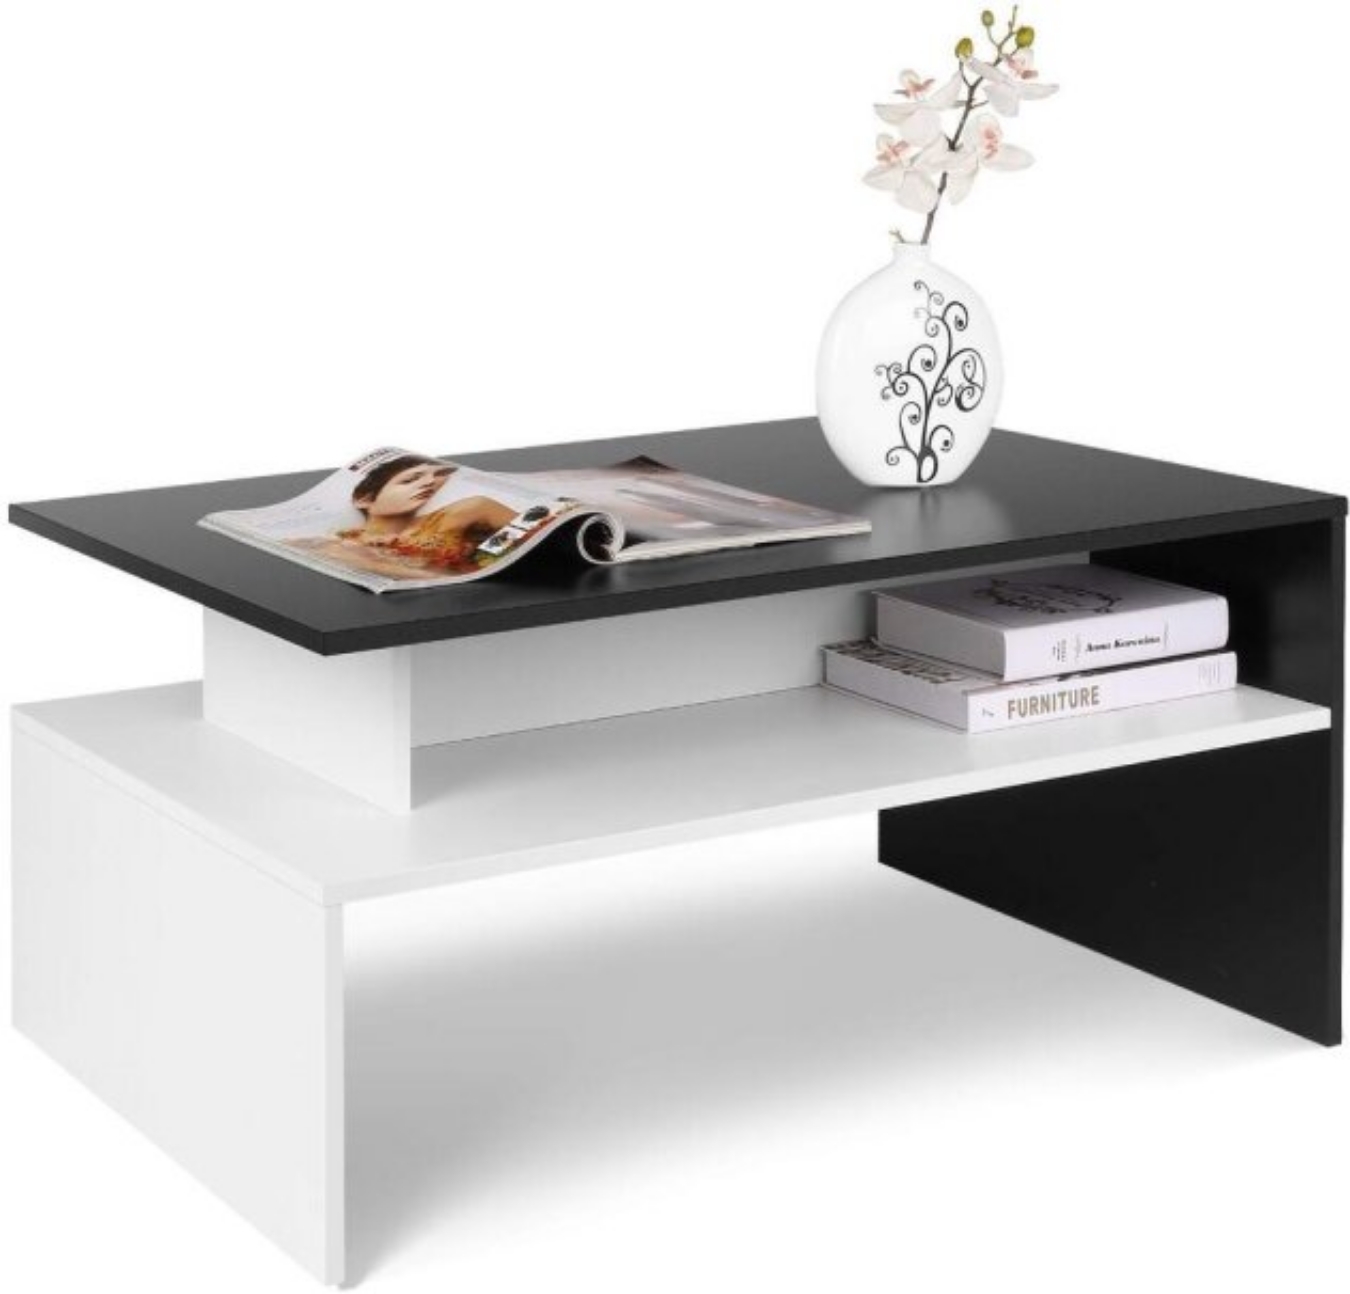 This SUPREME COFFEE TABLE is masterpiece for you to enjoy your morning coffee while reading your daily newspaper. 